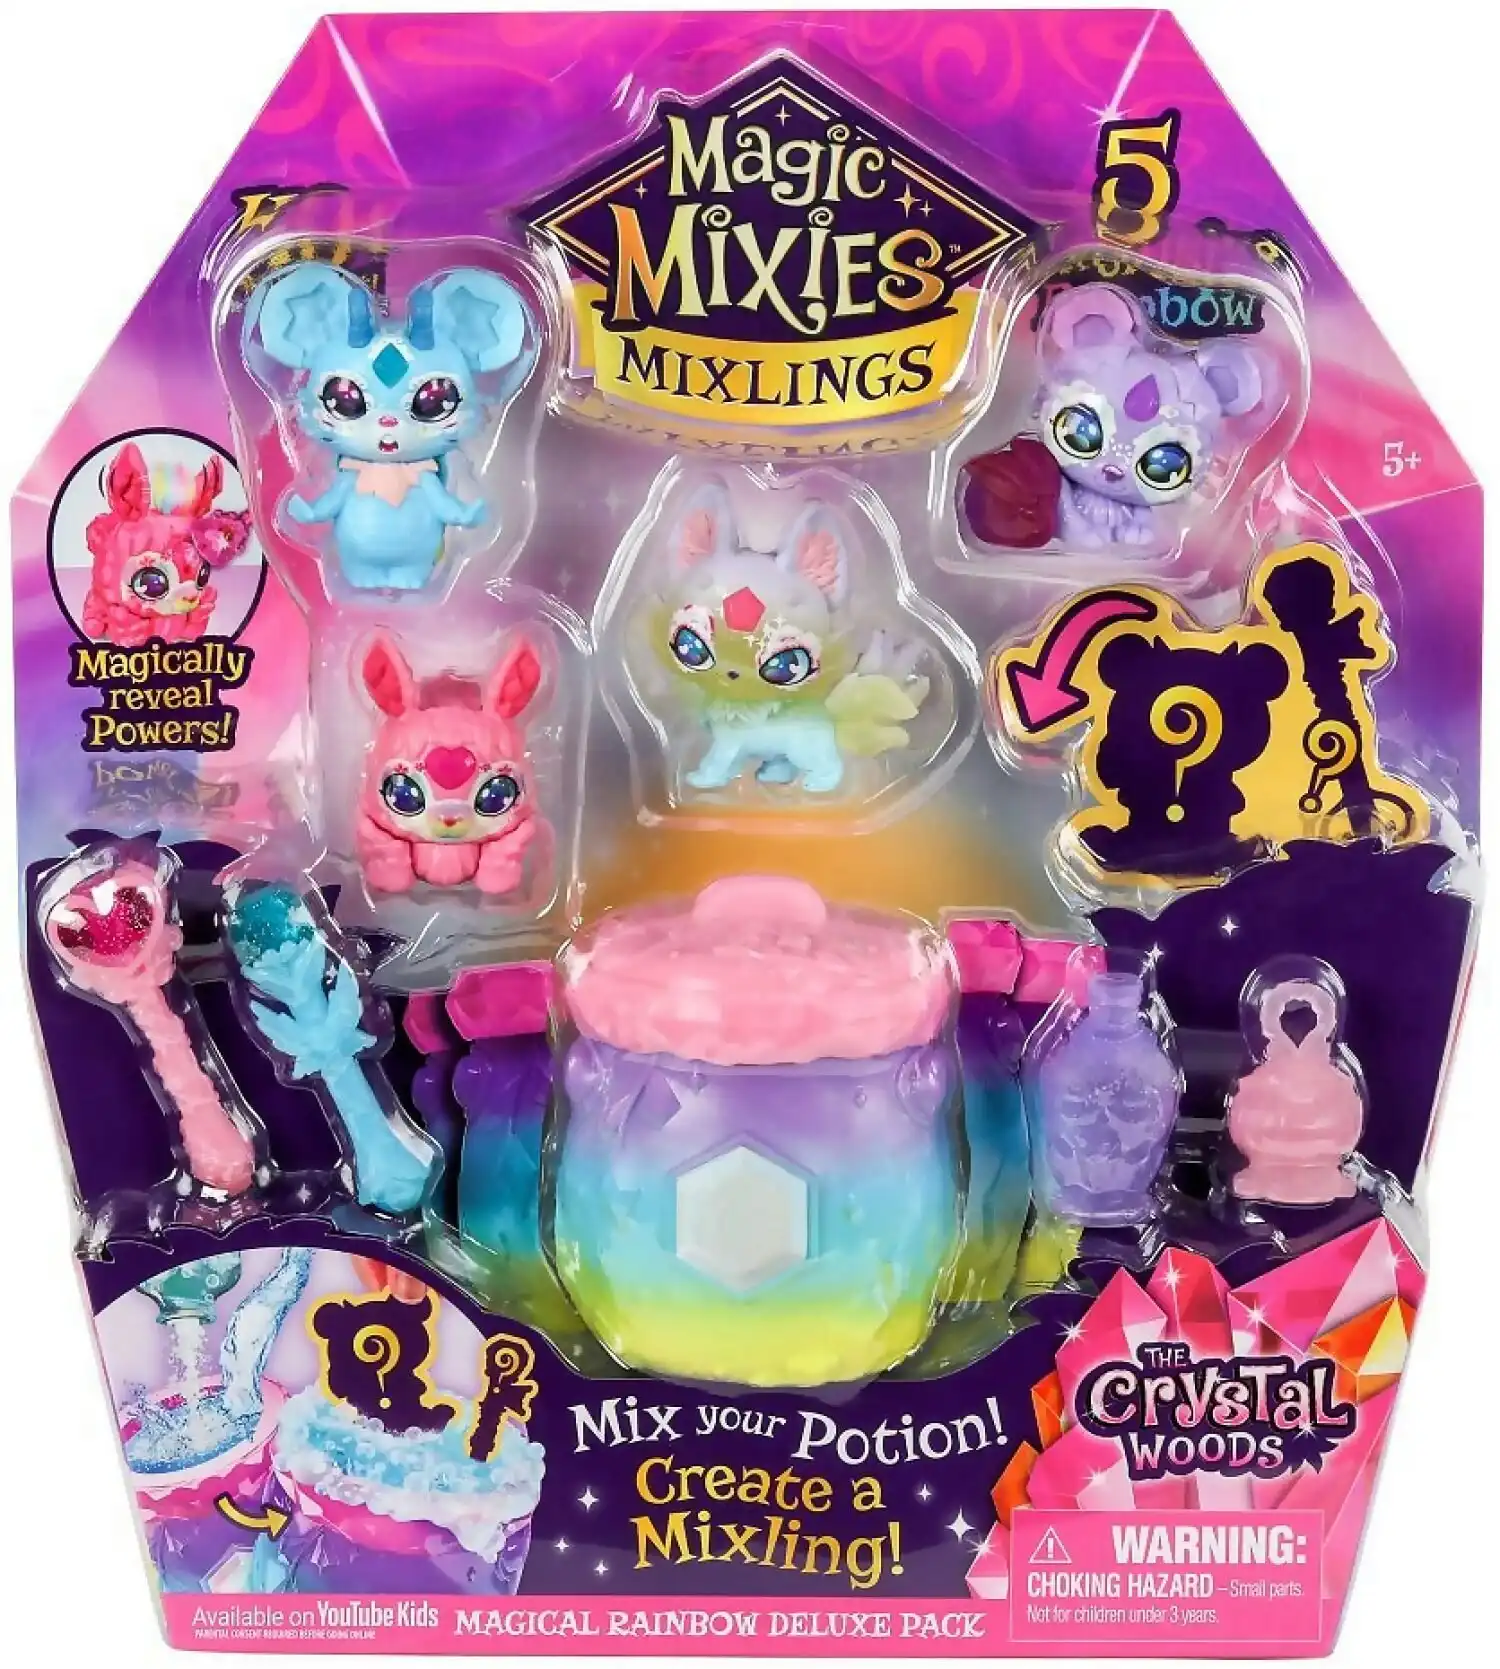 Magic Mixies - Mixlings Magical Rainbow Deluxe Pack